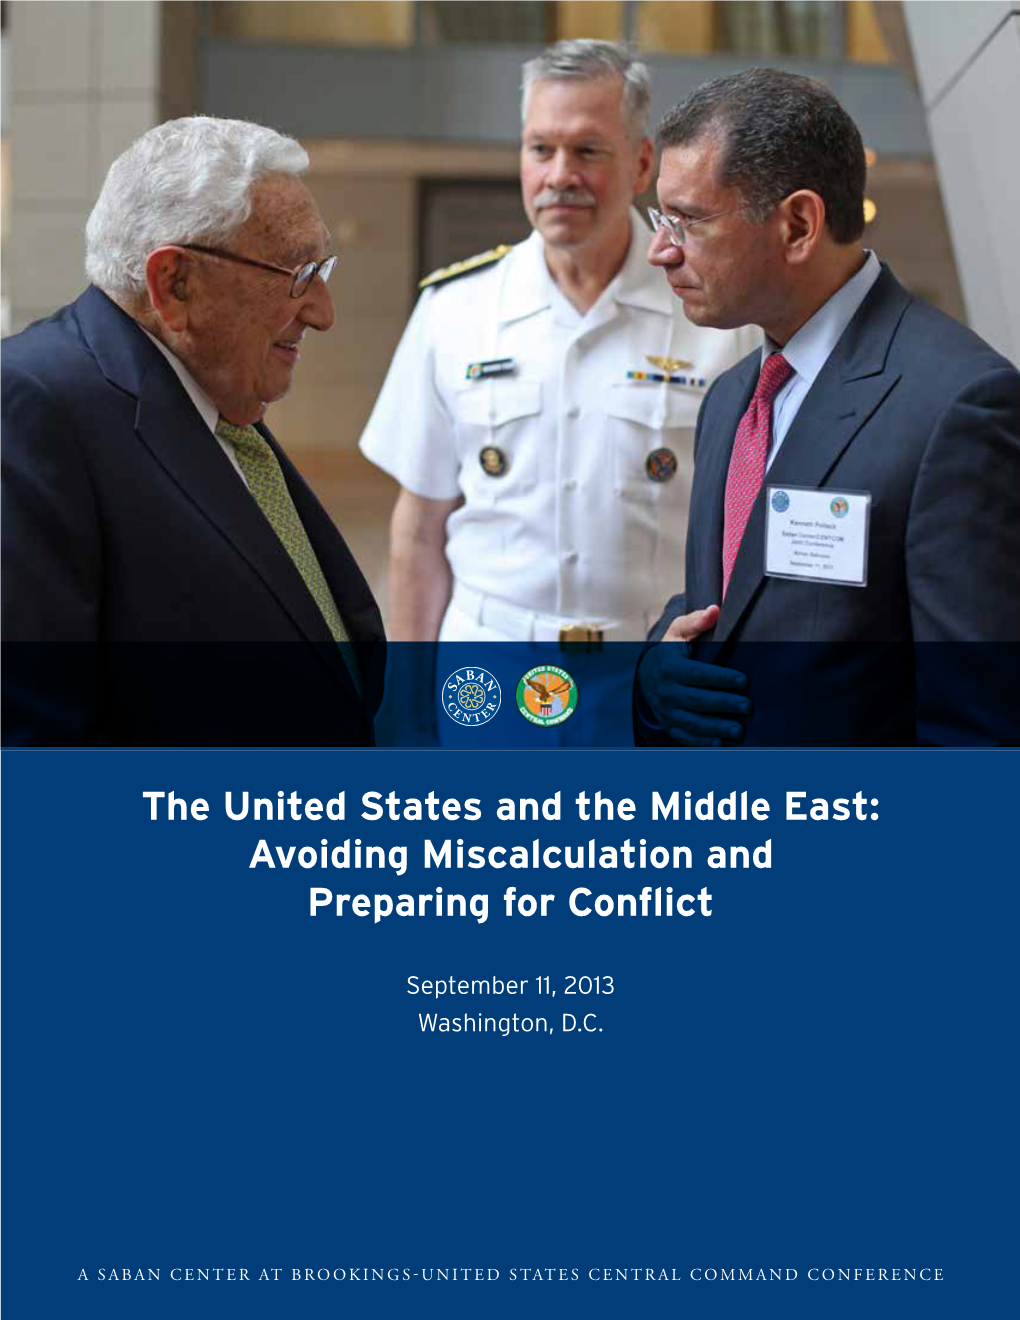 The United States and the Middle East: Avoiding Miscalculation and Preparing for Conflict